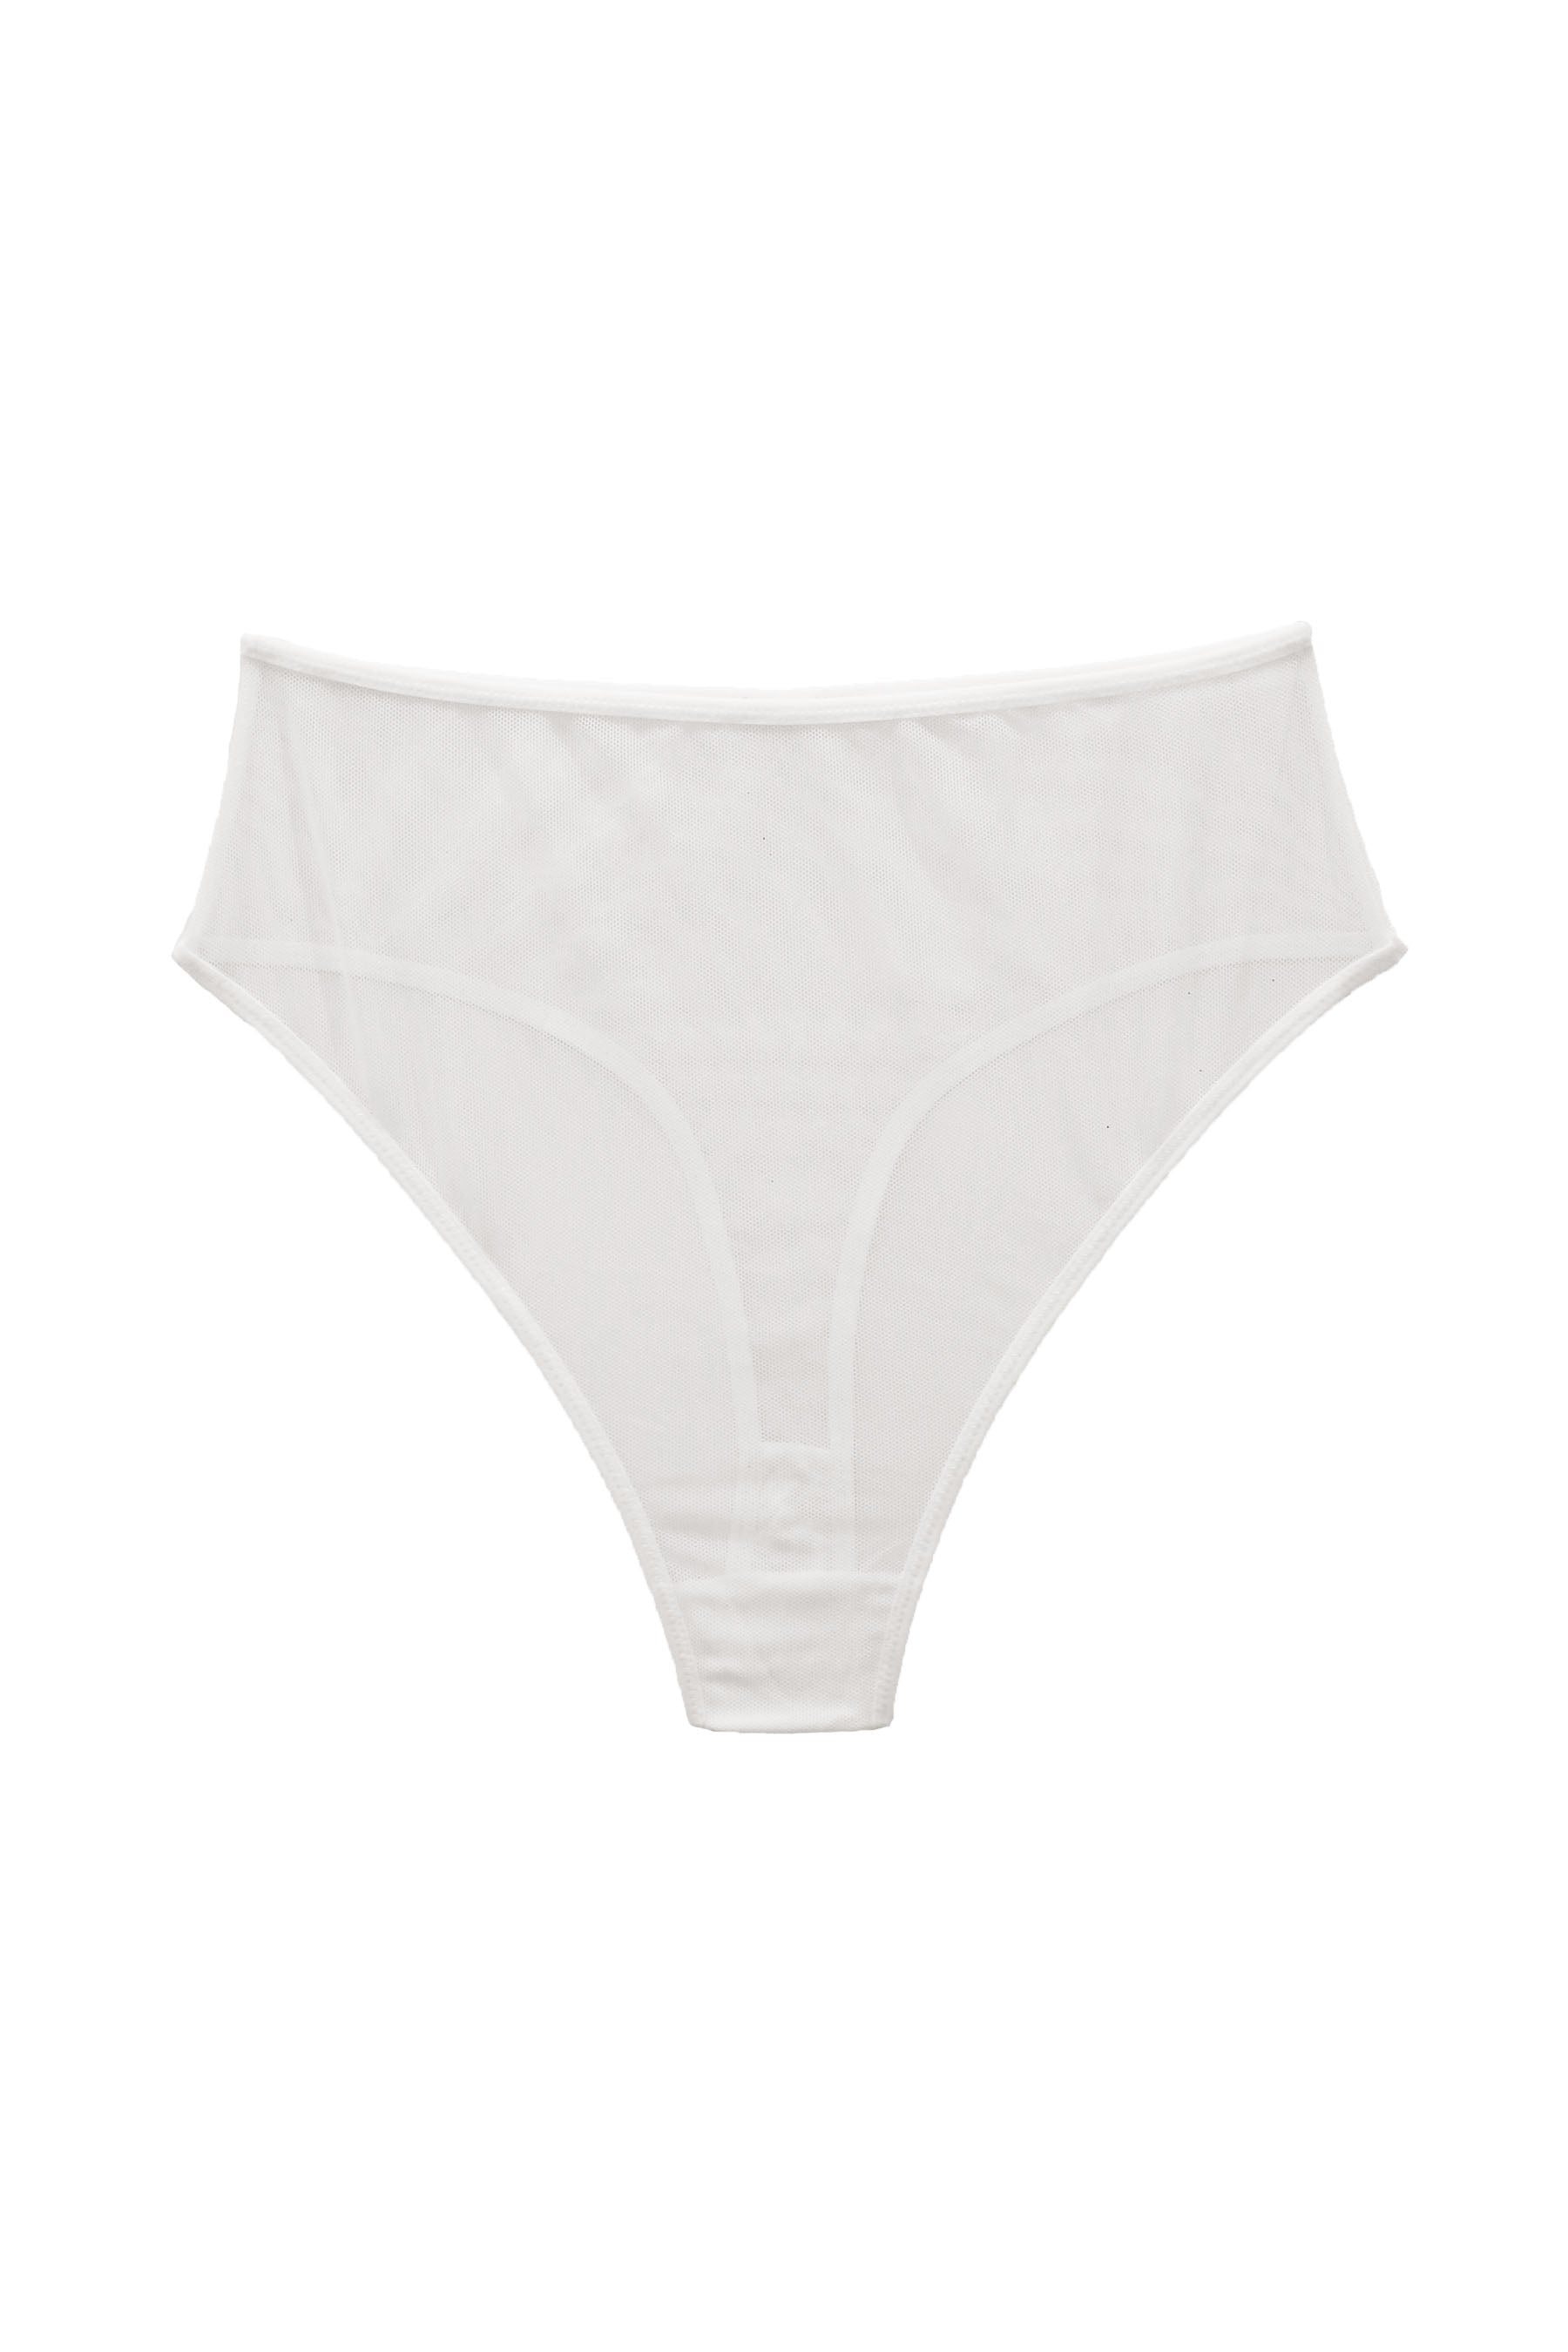 Georgie High Thong in White - MARY YOUNG